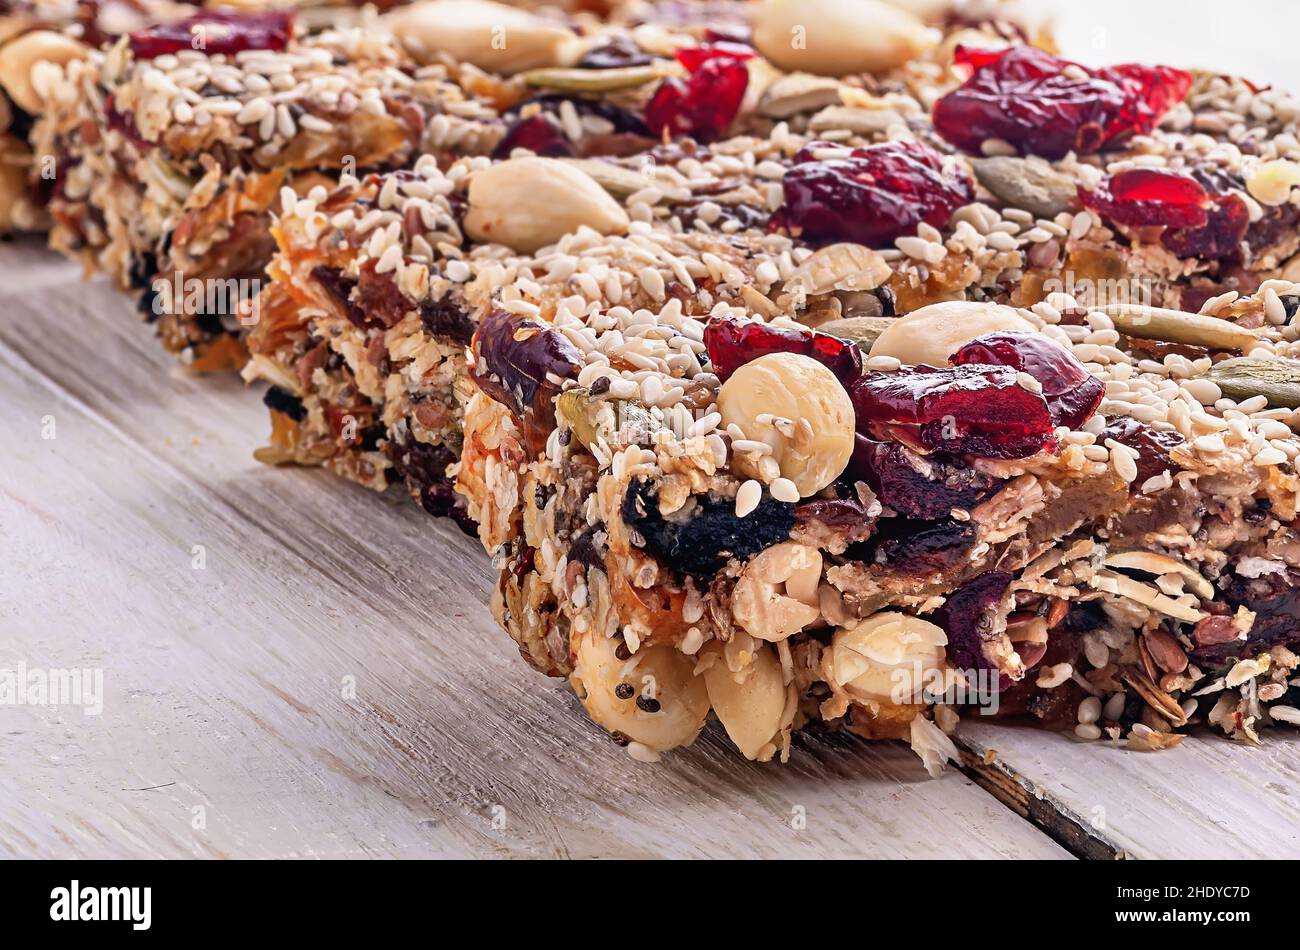 protein bar, protein bars Stock Photo